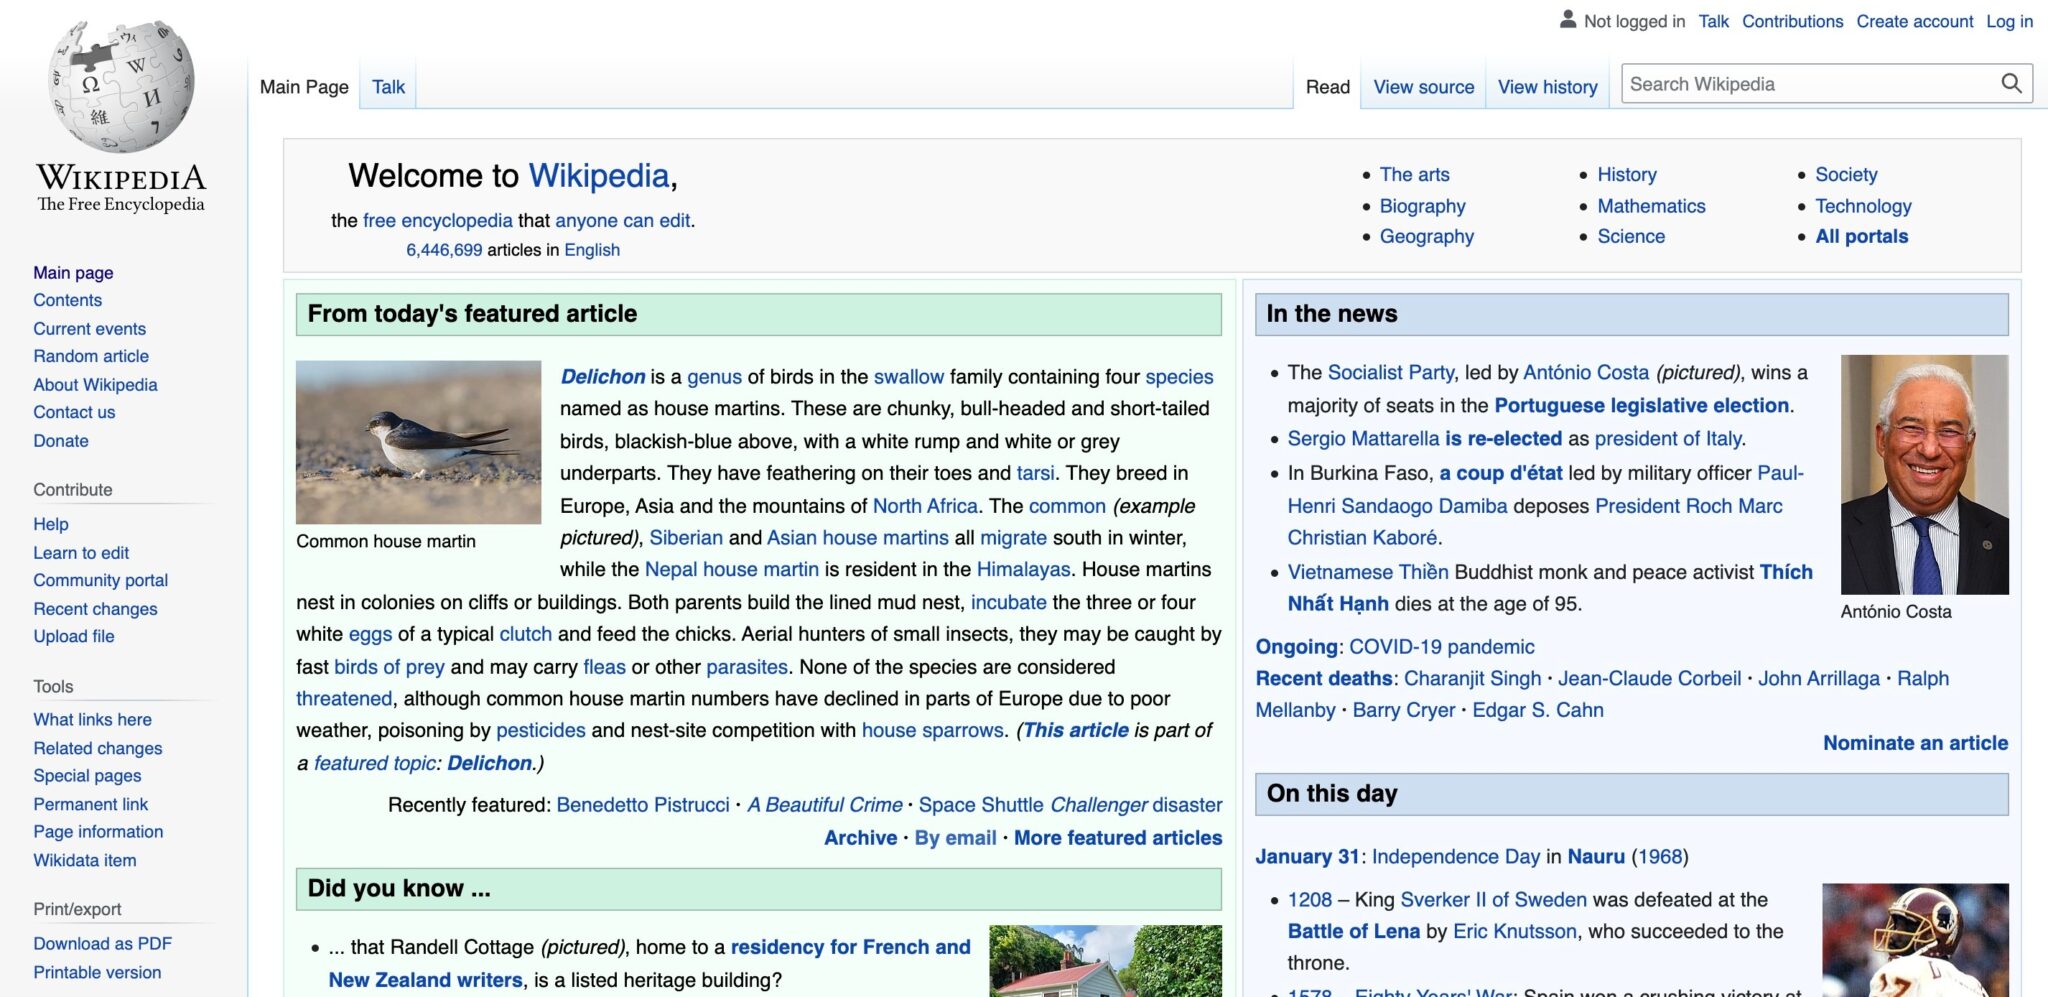 How Does Wikipedia Make Money?